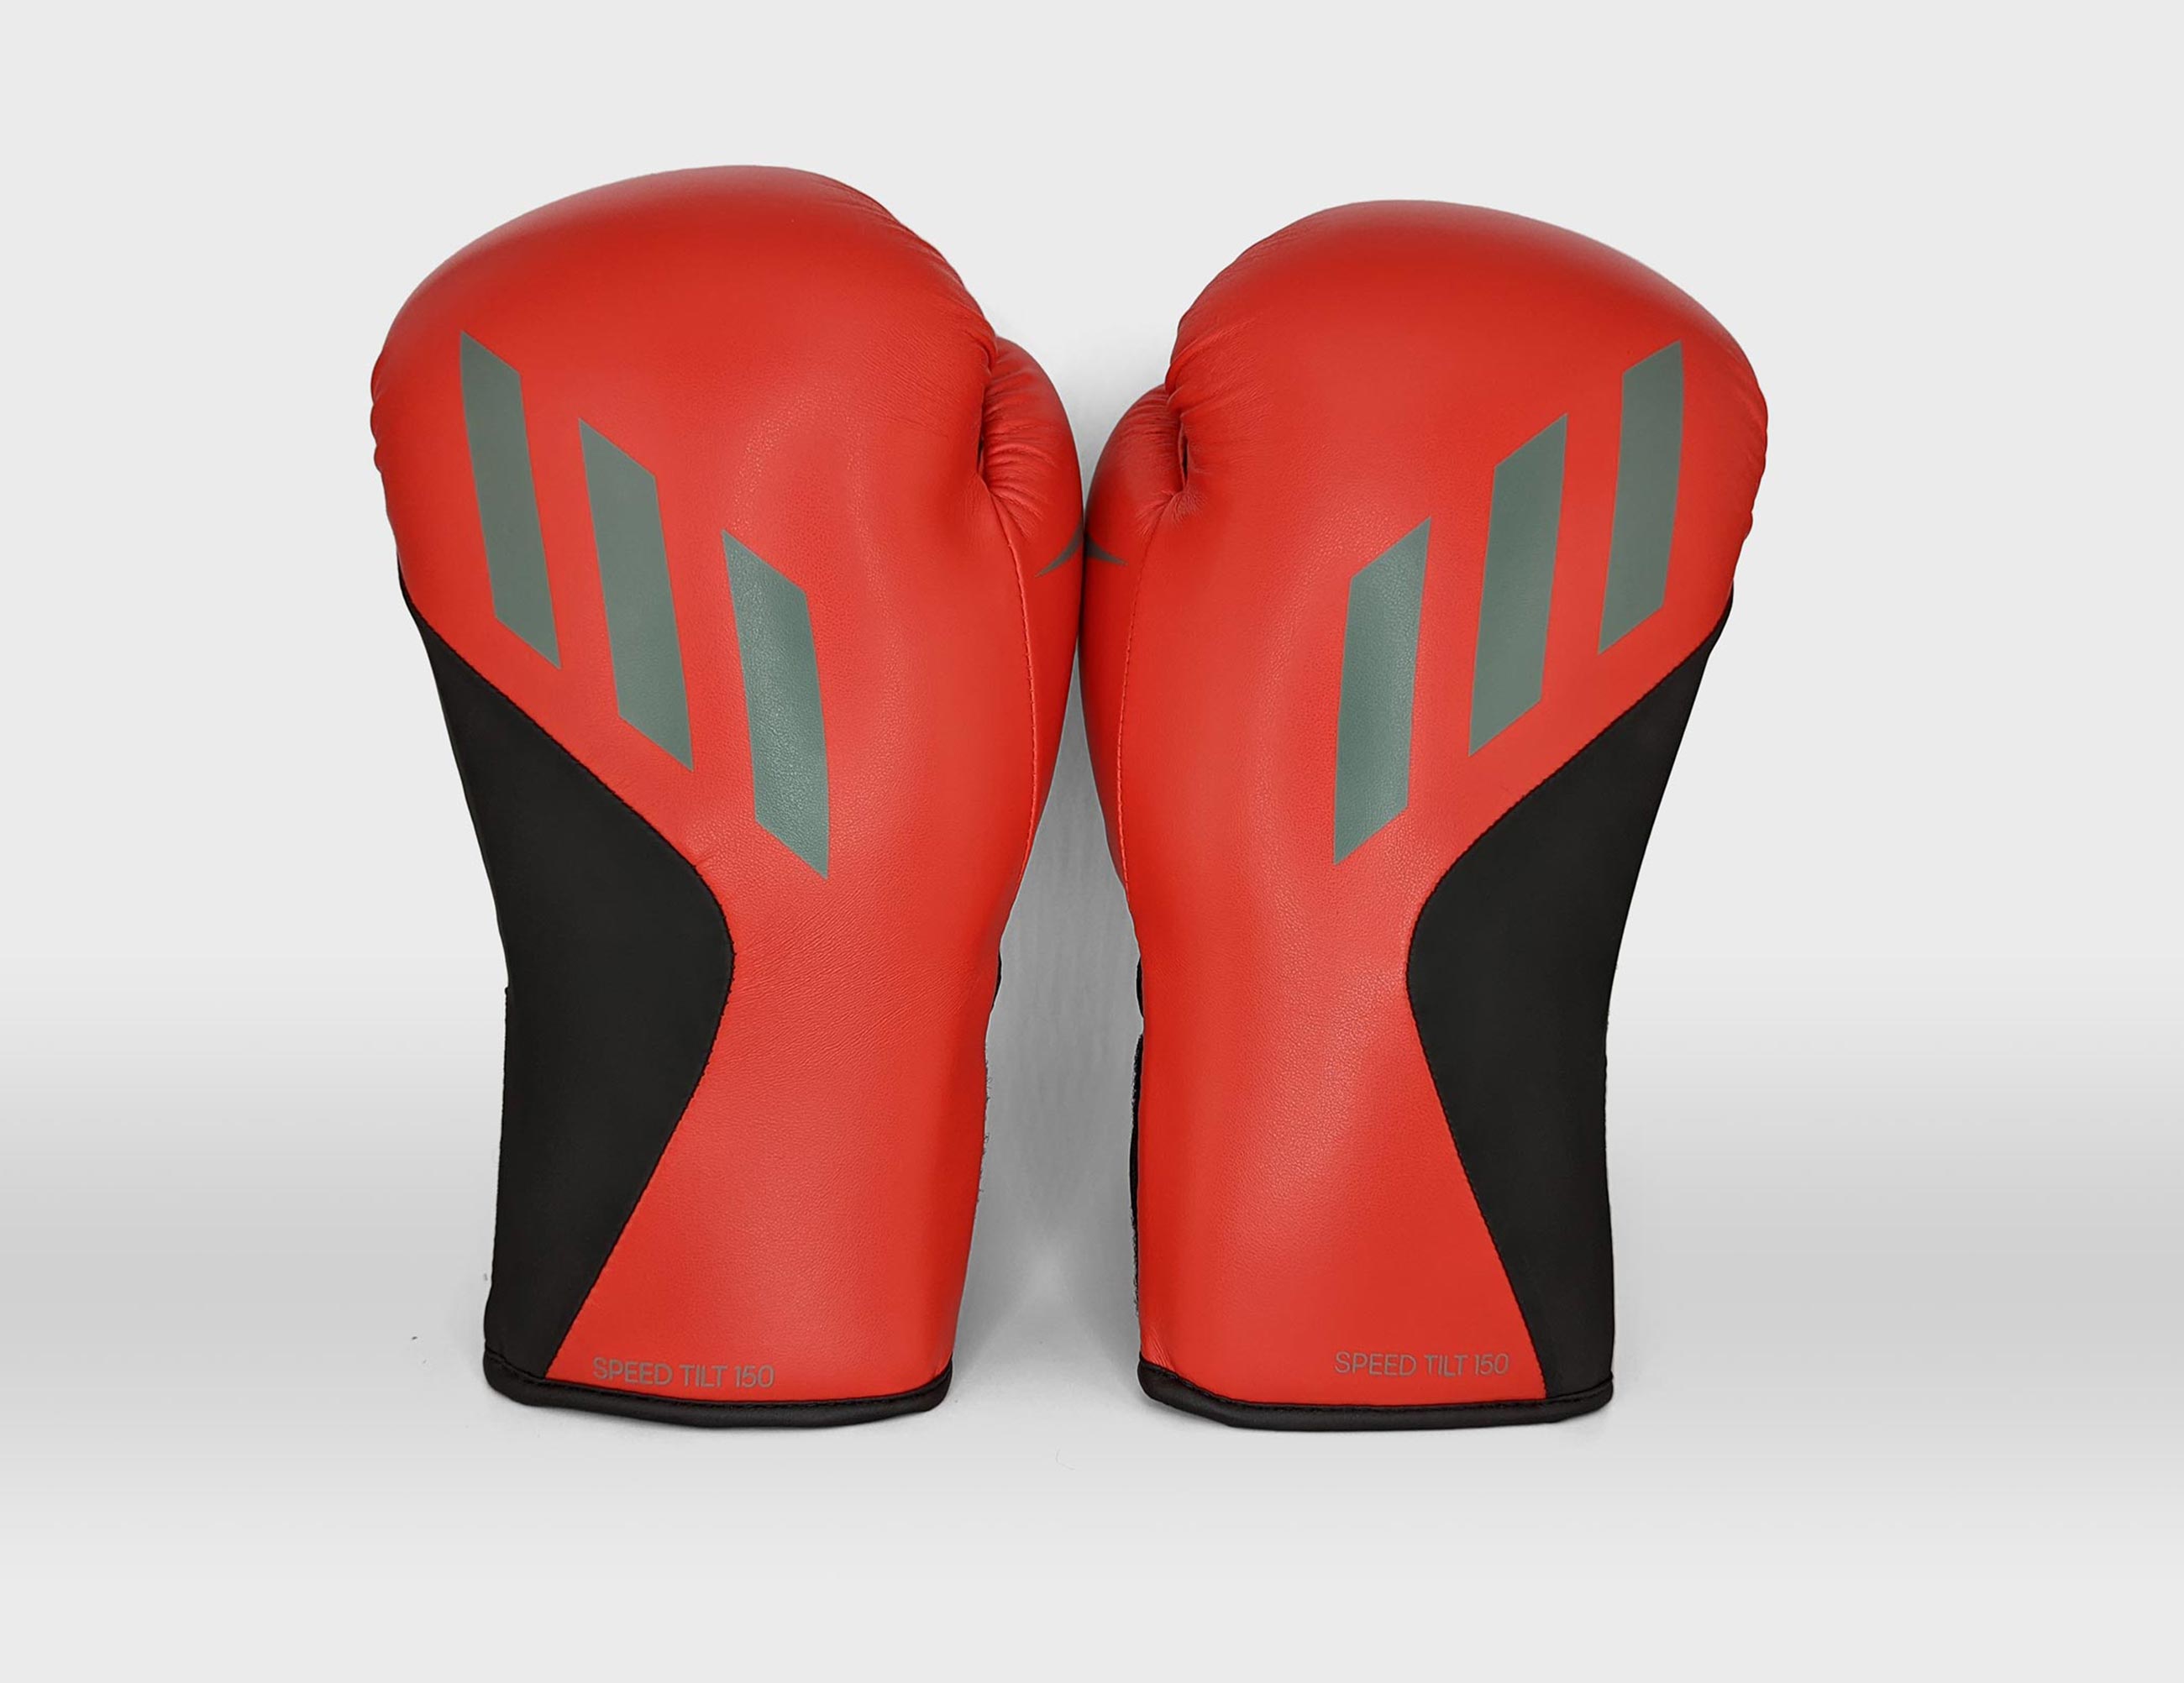 Product image of Adidas Speed Tilt 150 Training Gloves available at ATL Fight Shop. Shop online or in-store at our Roswell, GA location.